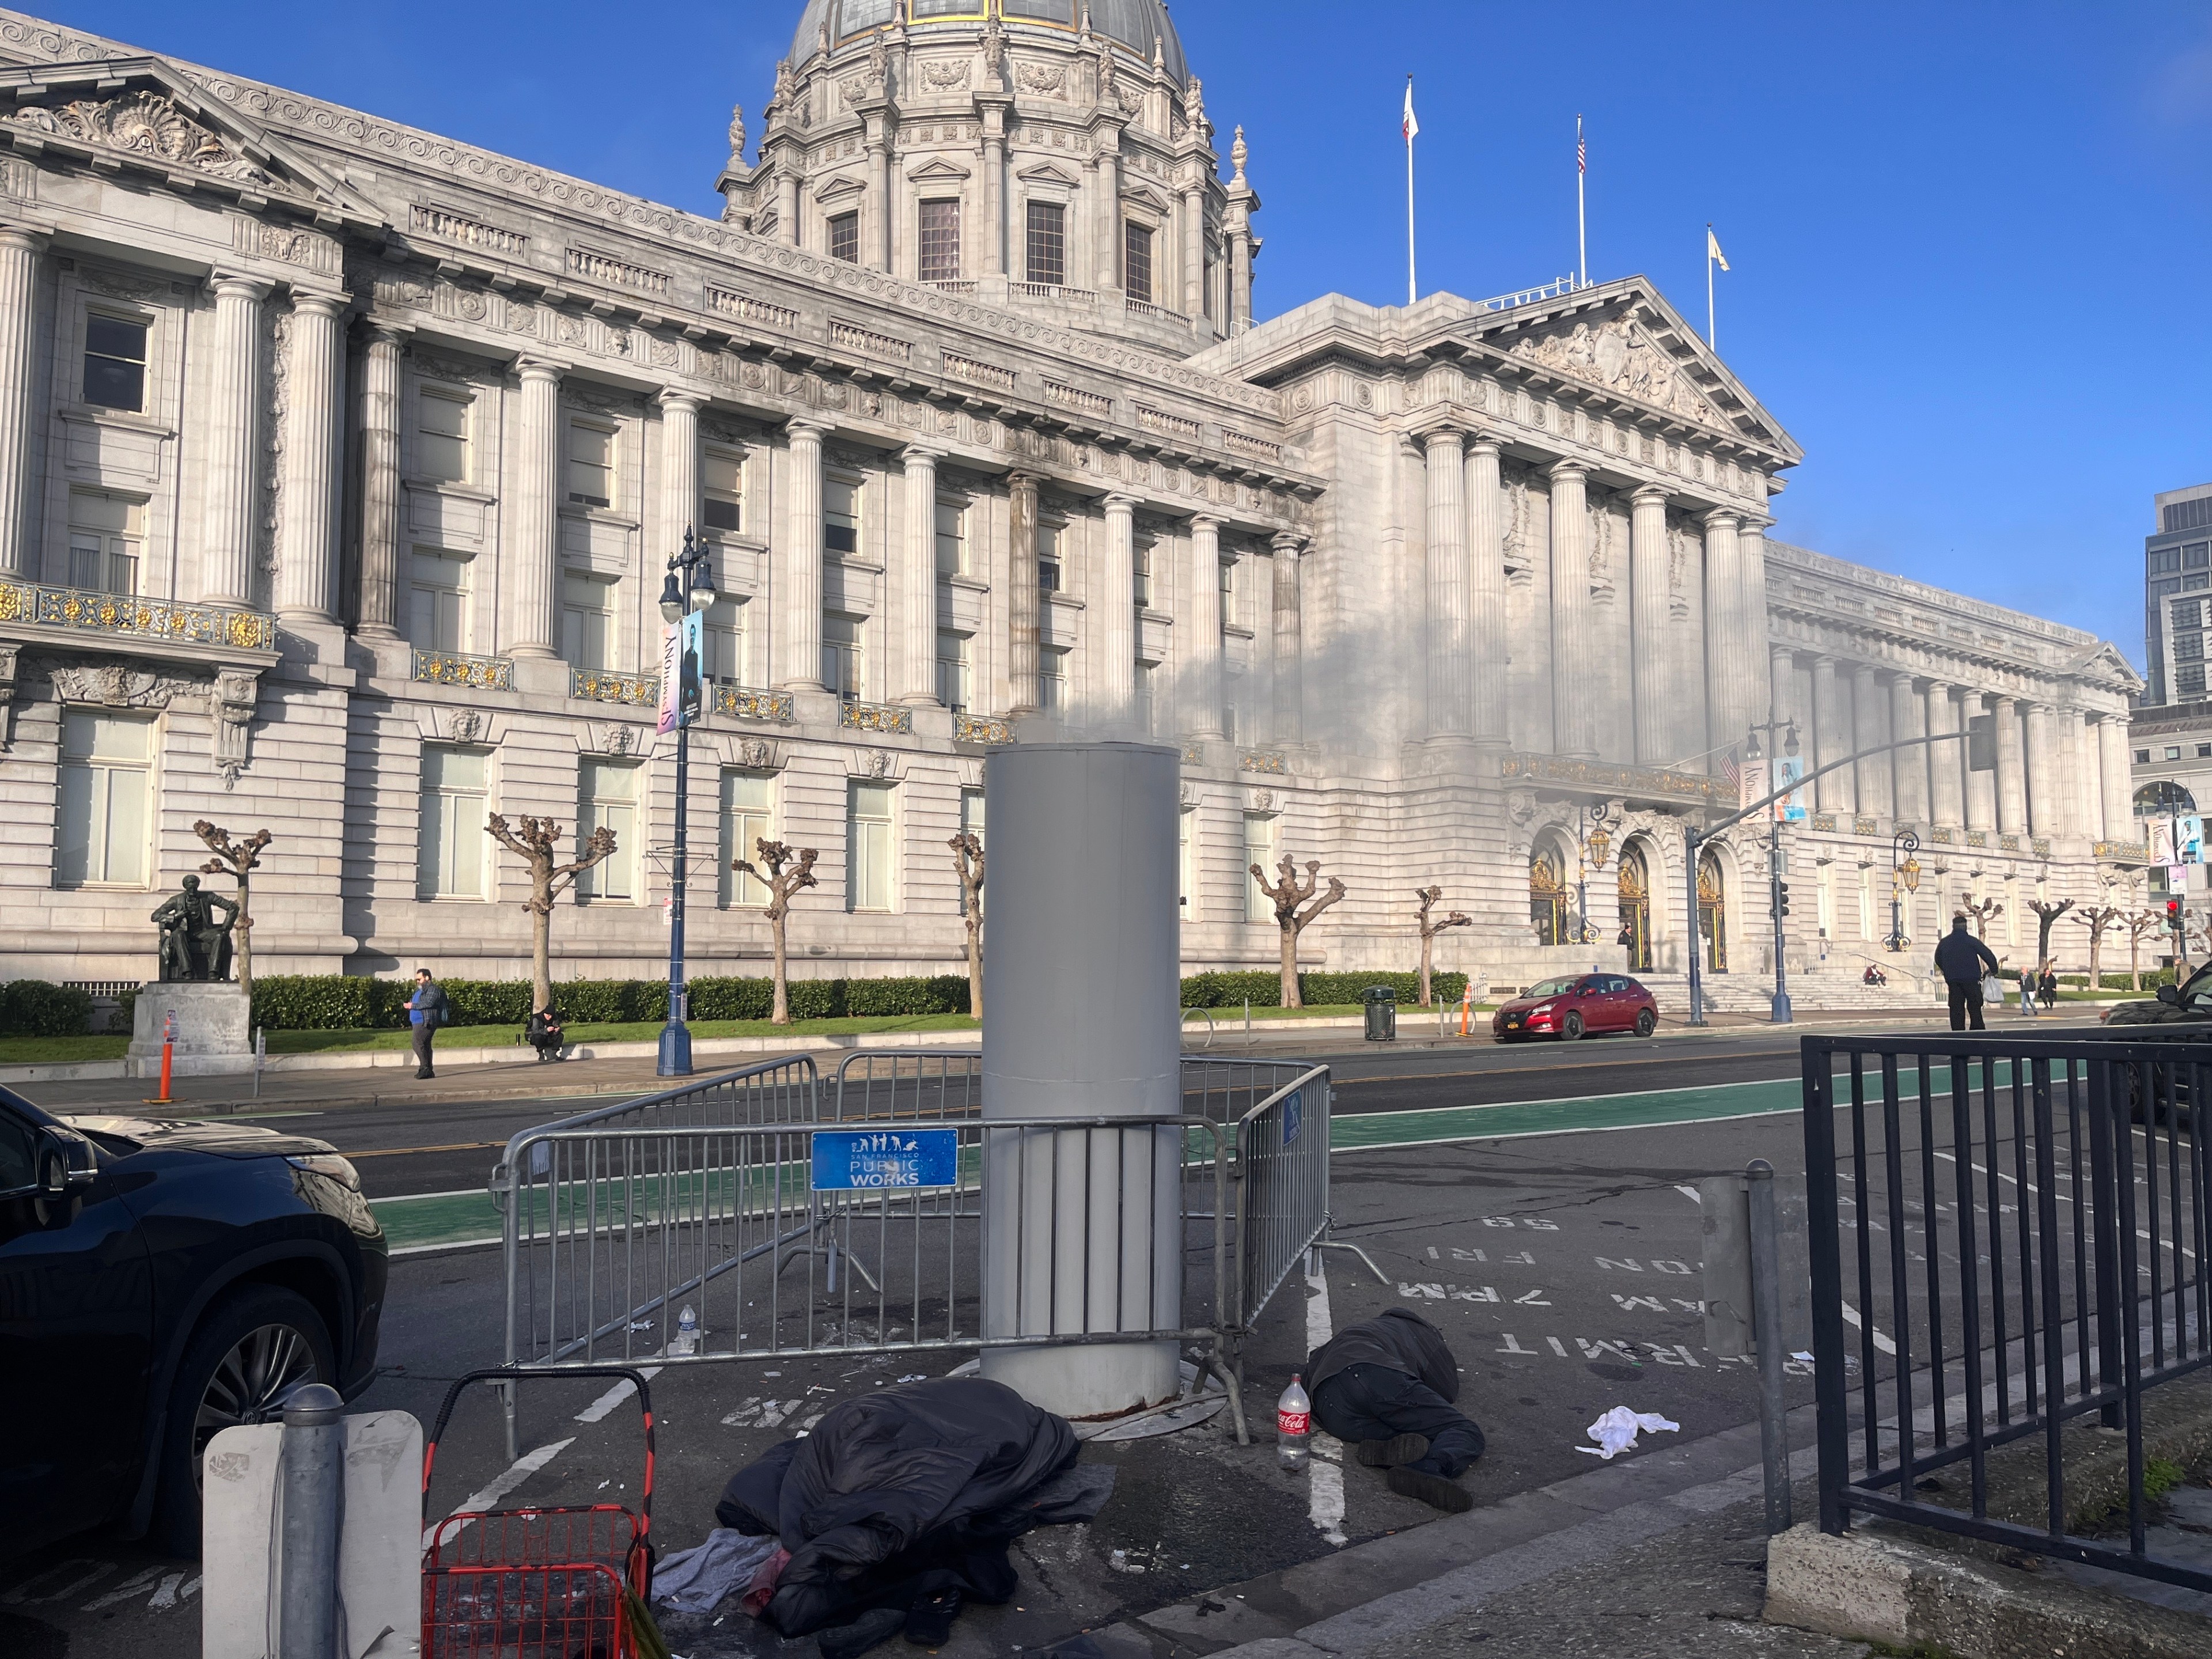 An imposing city hall with classical architecture and sculptures, with metal barricades and two people lying on the sidewalk covered with blankets.